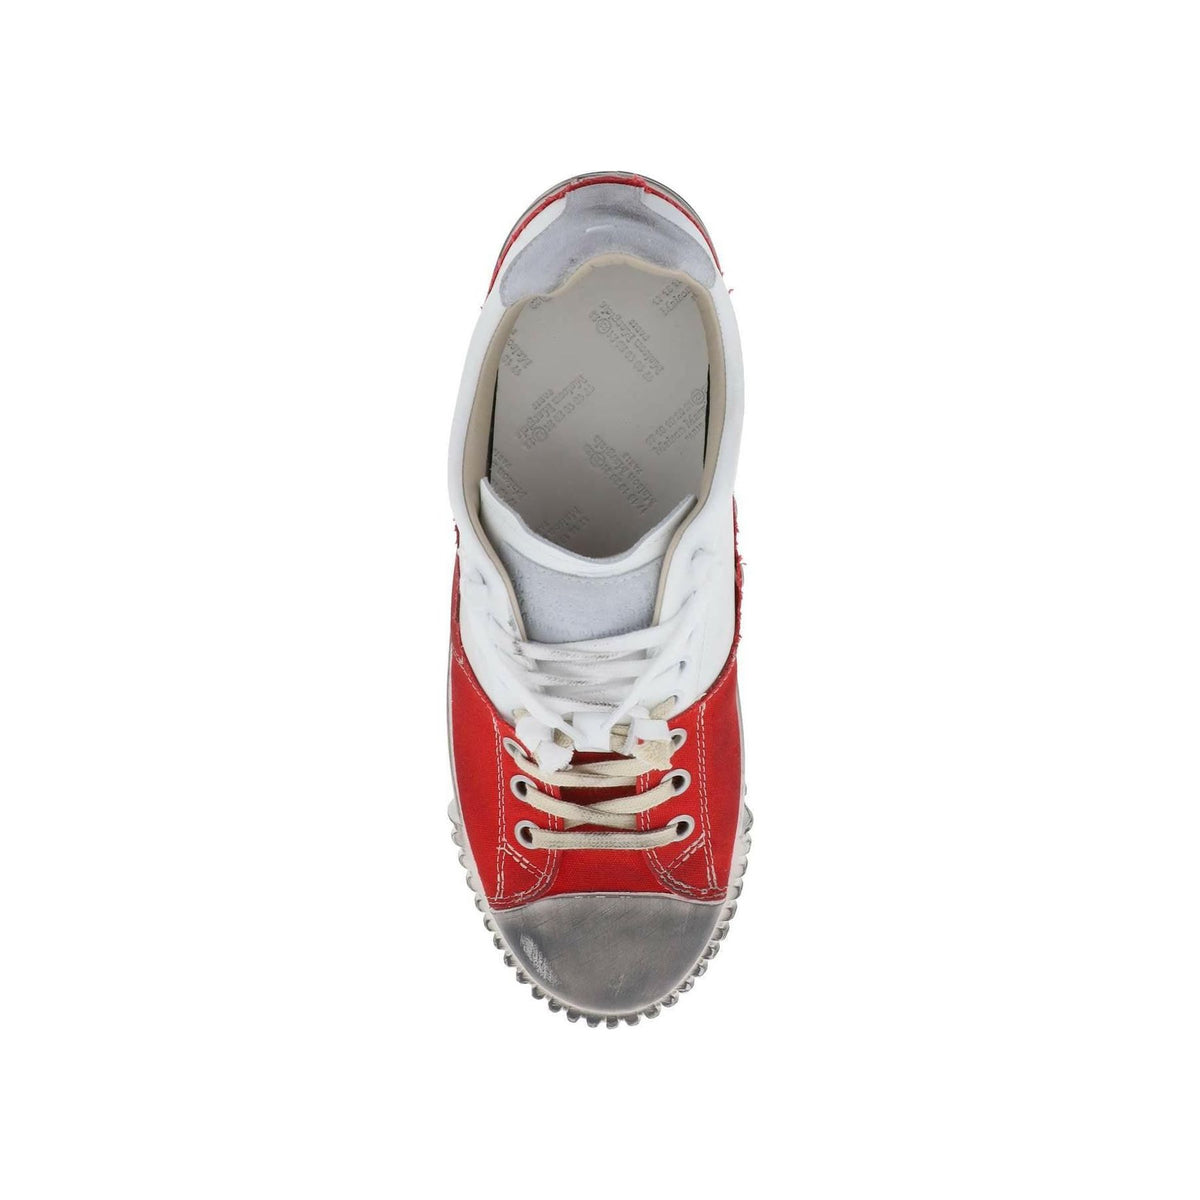 MAISON MARGIELA - White and Red New Evolution Leather and Canvas Sneakers - JOHN JULIA